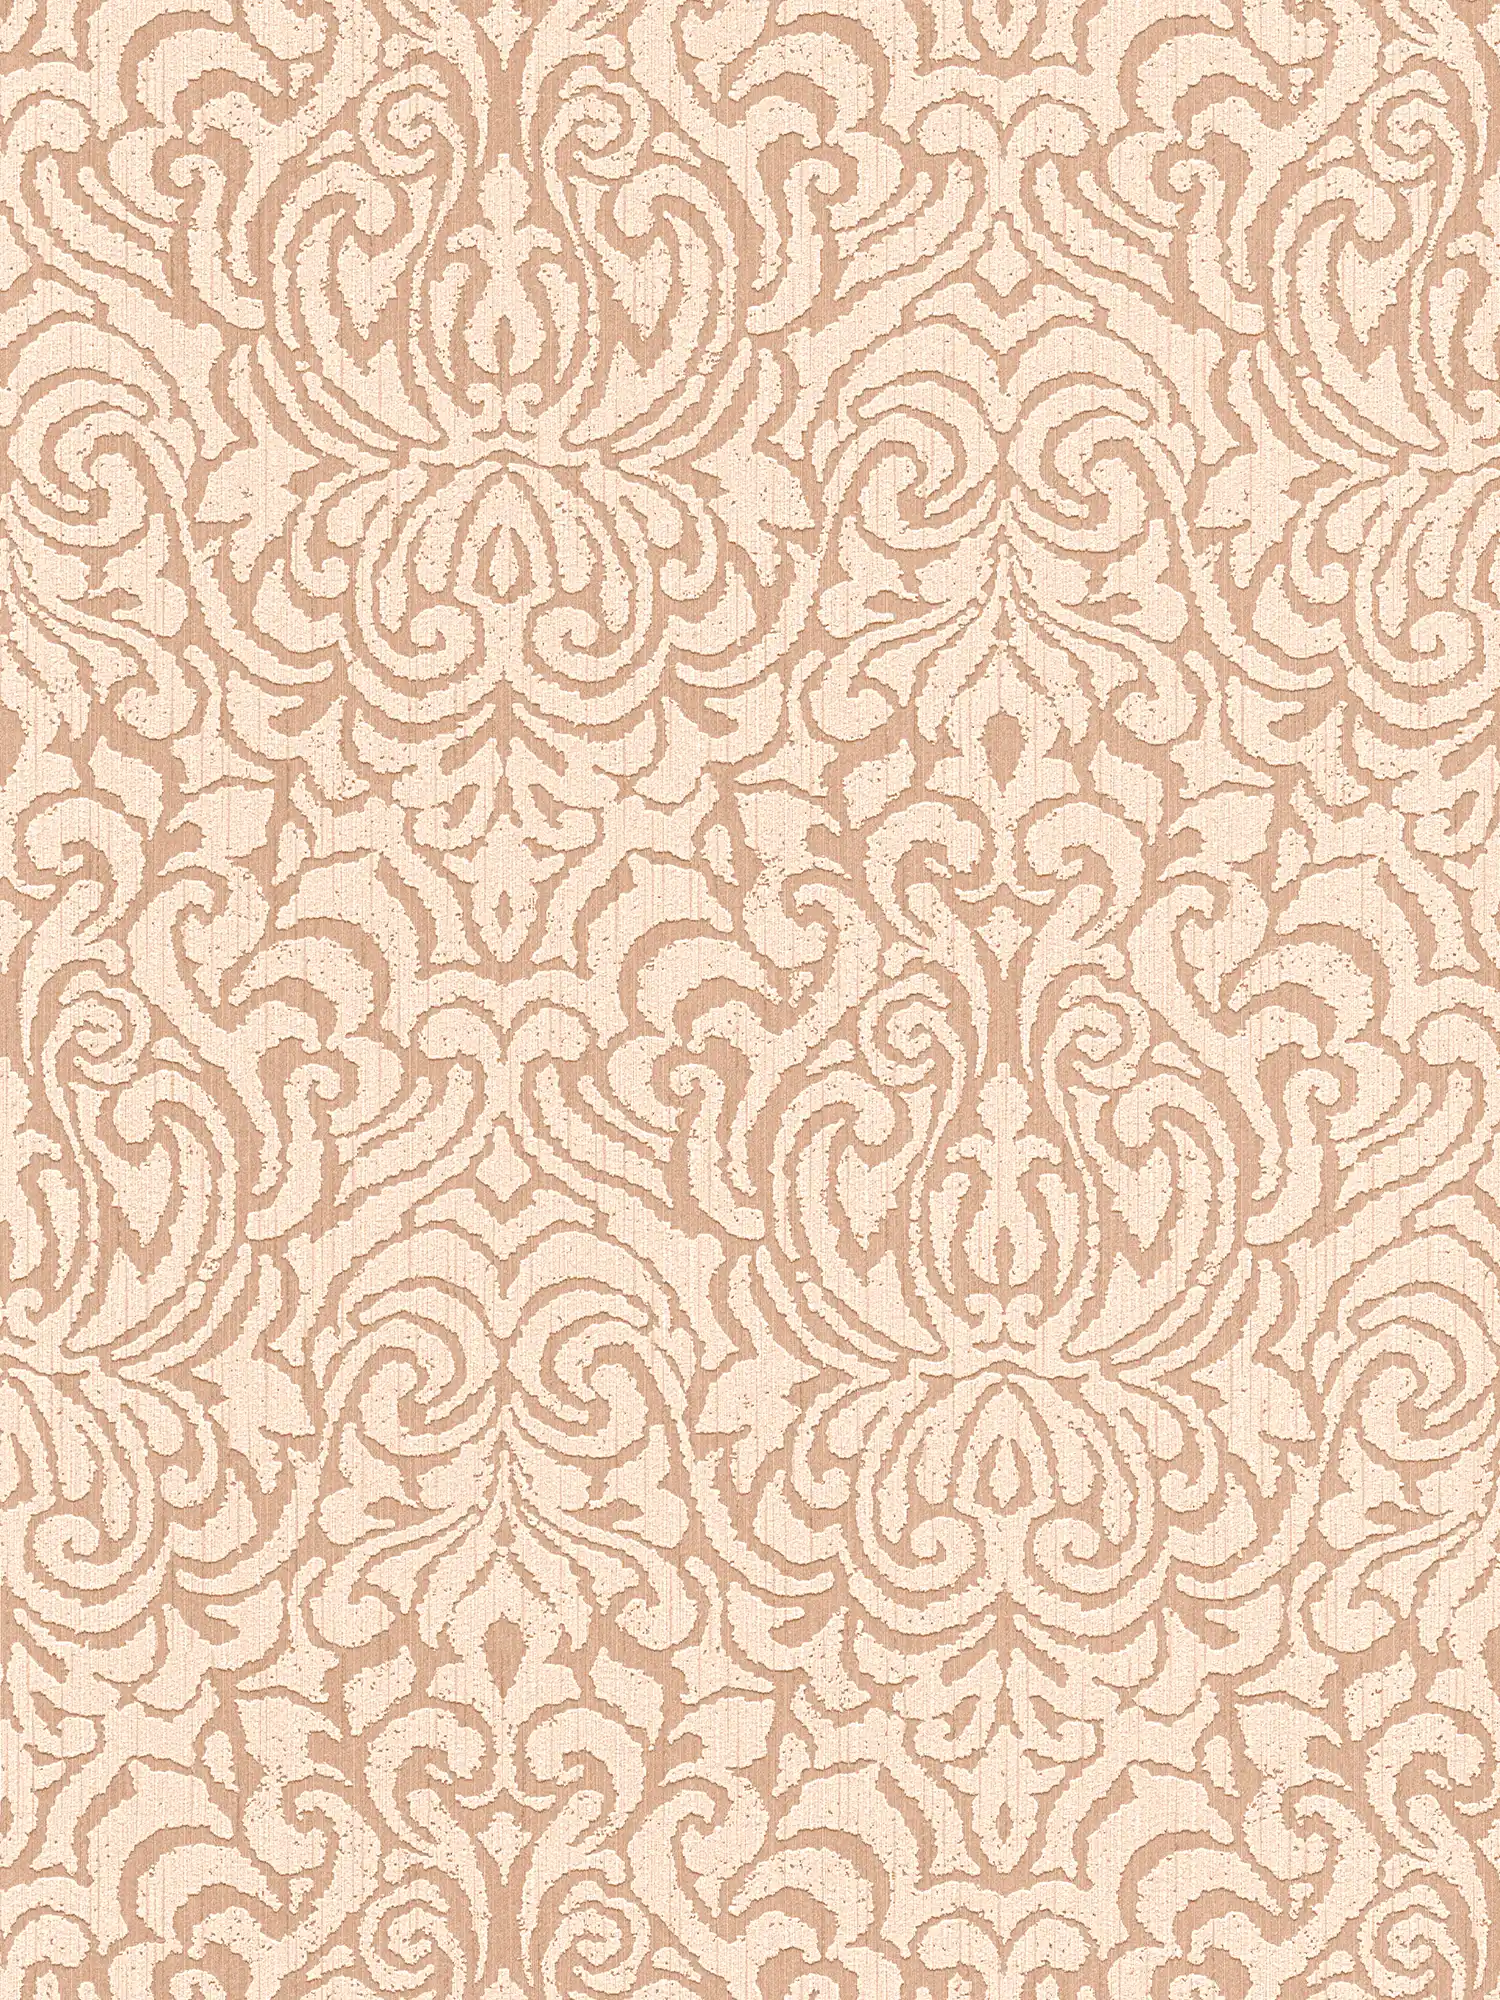 wallpaper ornaments used look with texture effect - beige
